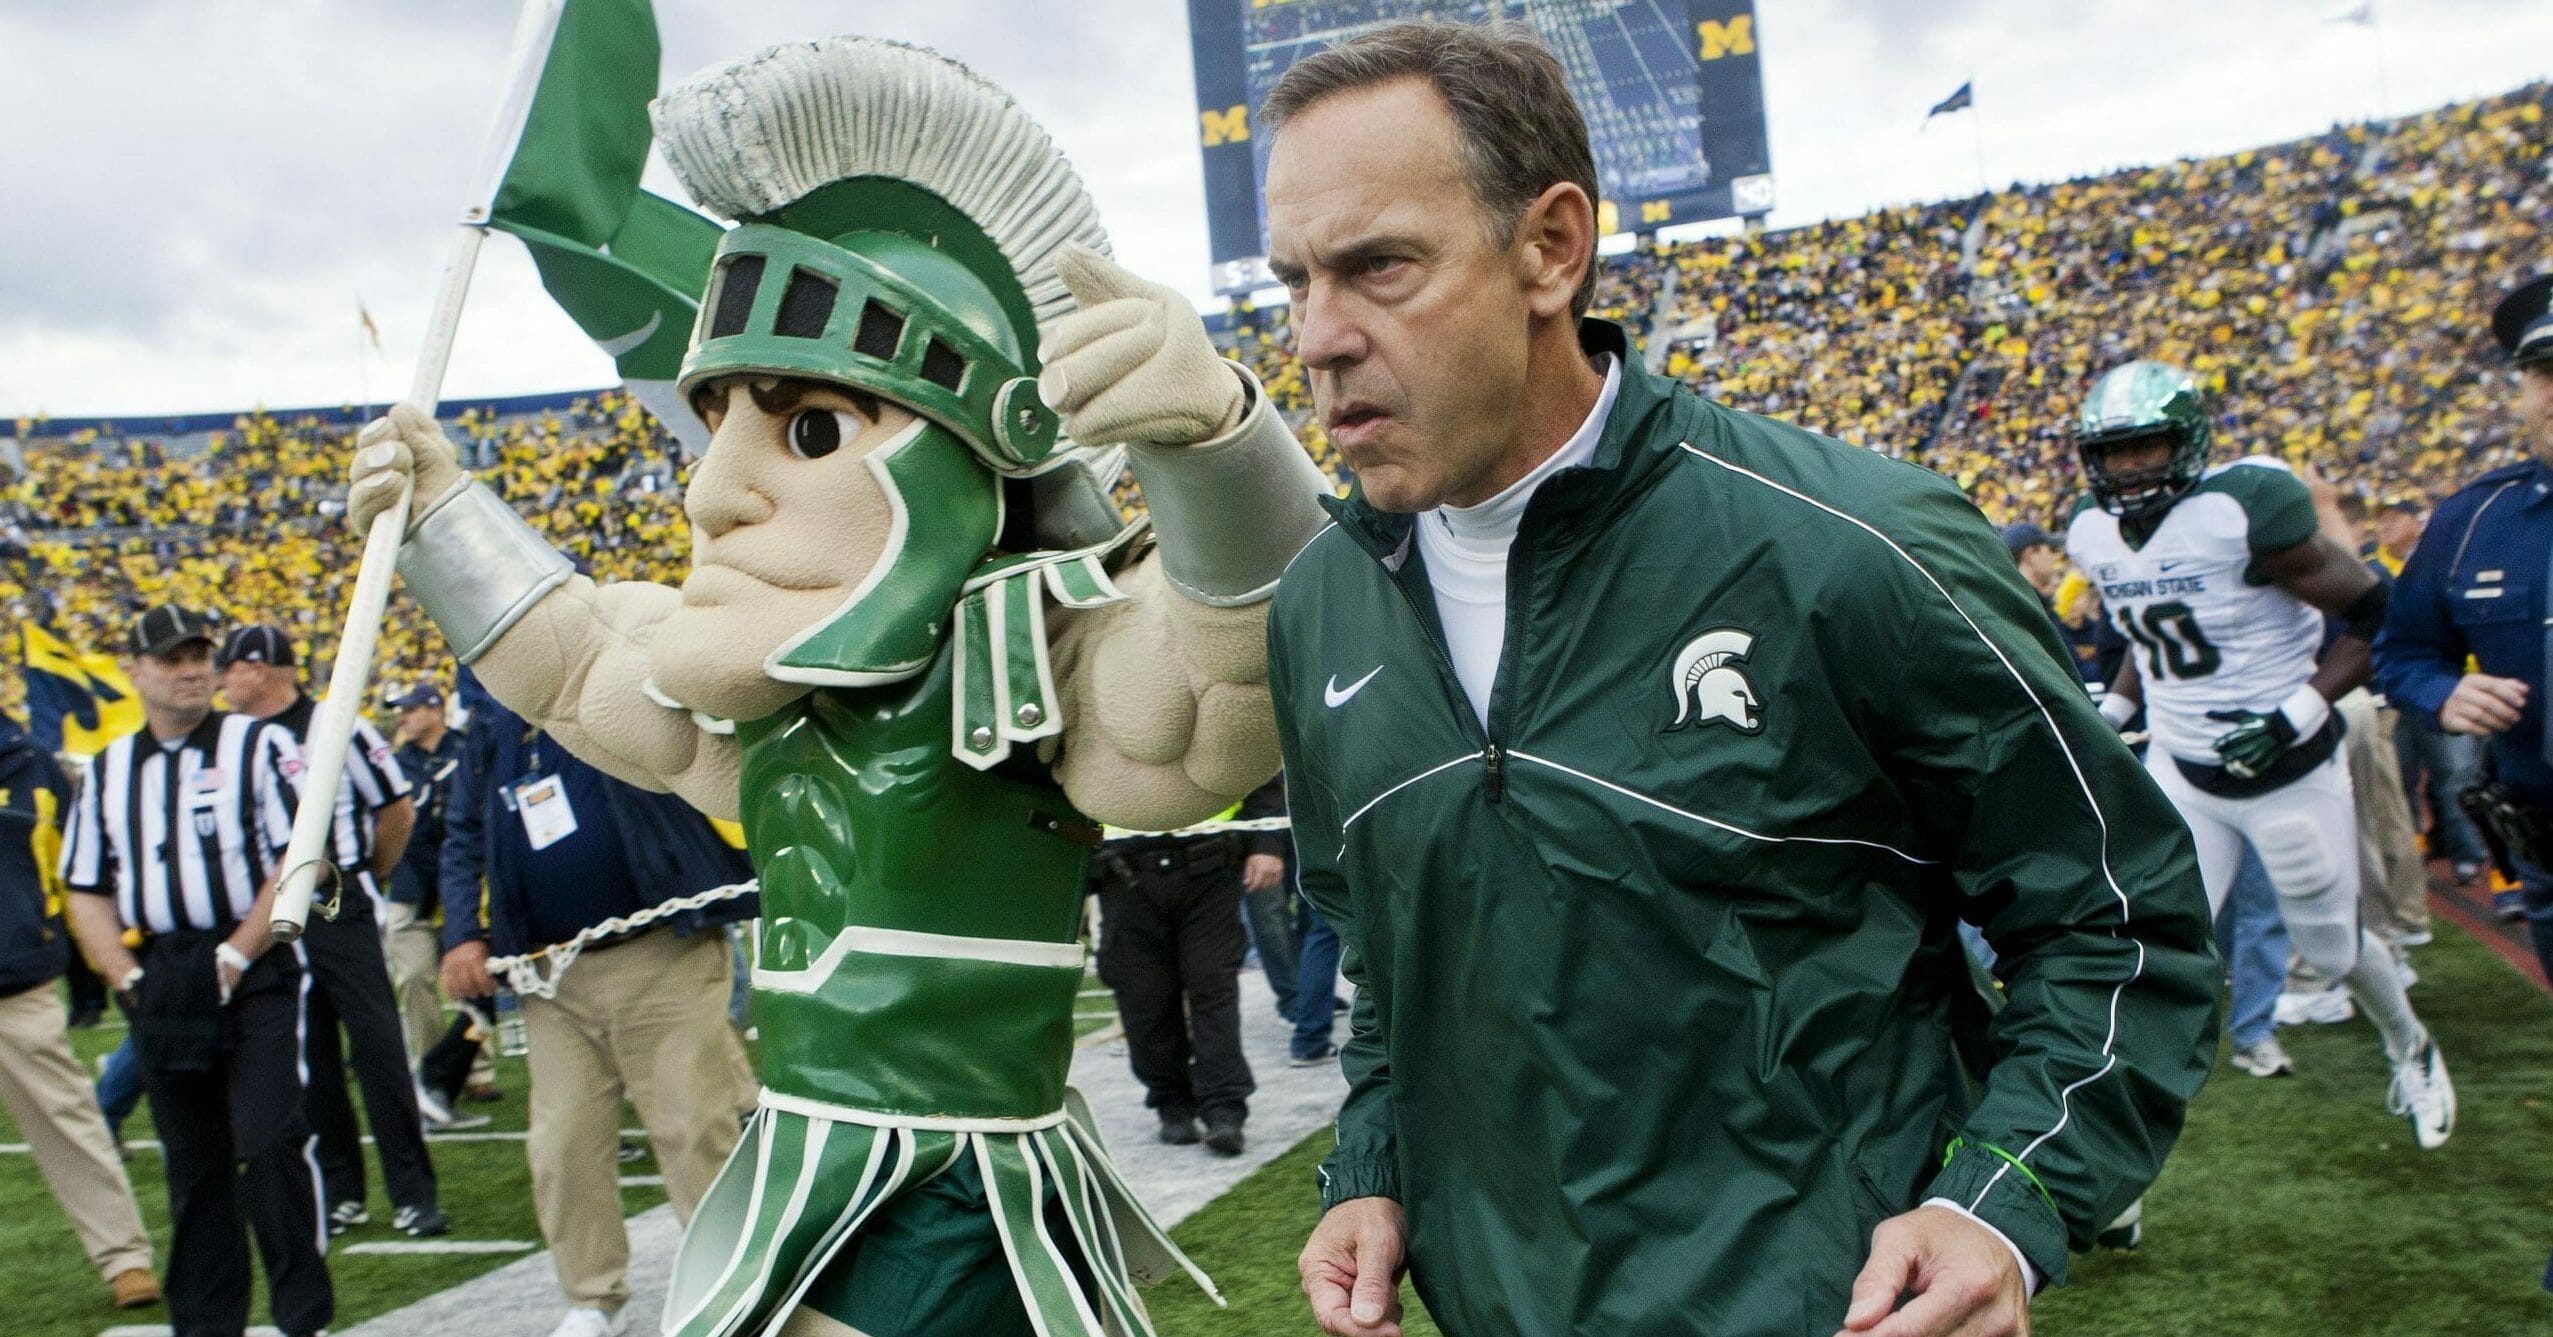 Michigan State head coach Mark Dantonio, right, runs out on to the Michigan Stadium field alongside the school mascot, Sparty, before an Oct. 20, 2012, game against Michigan in Ann Arbor.